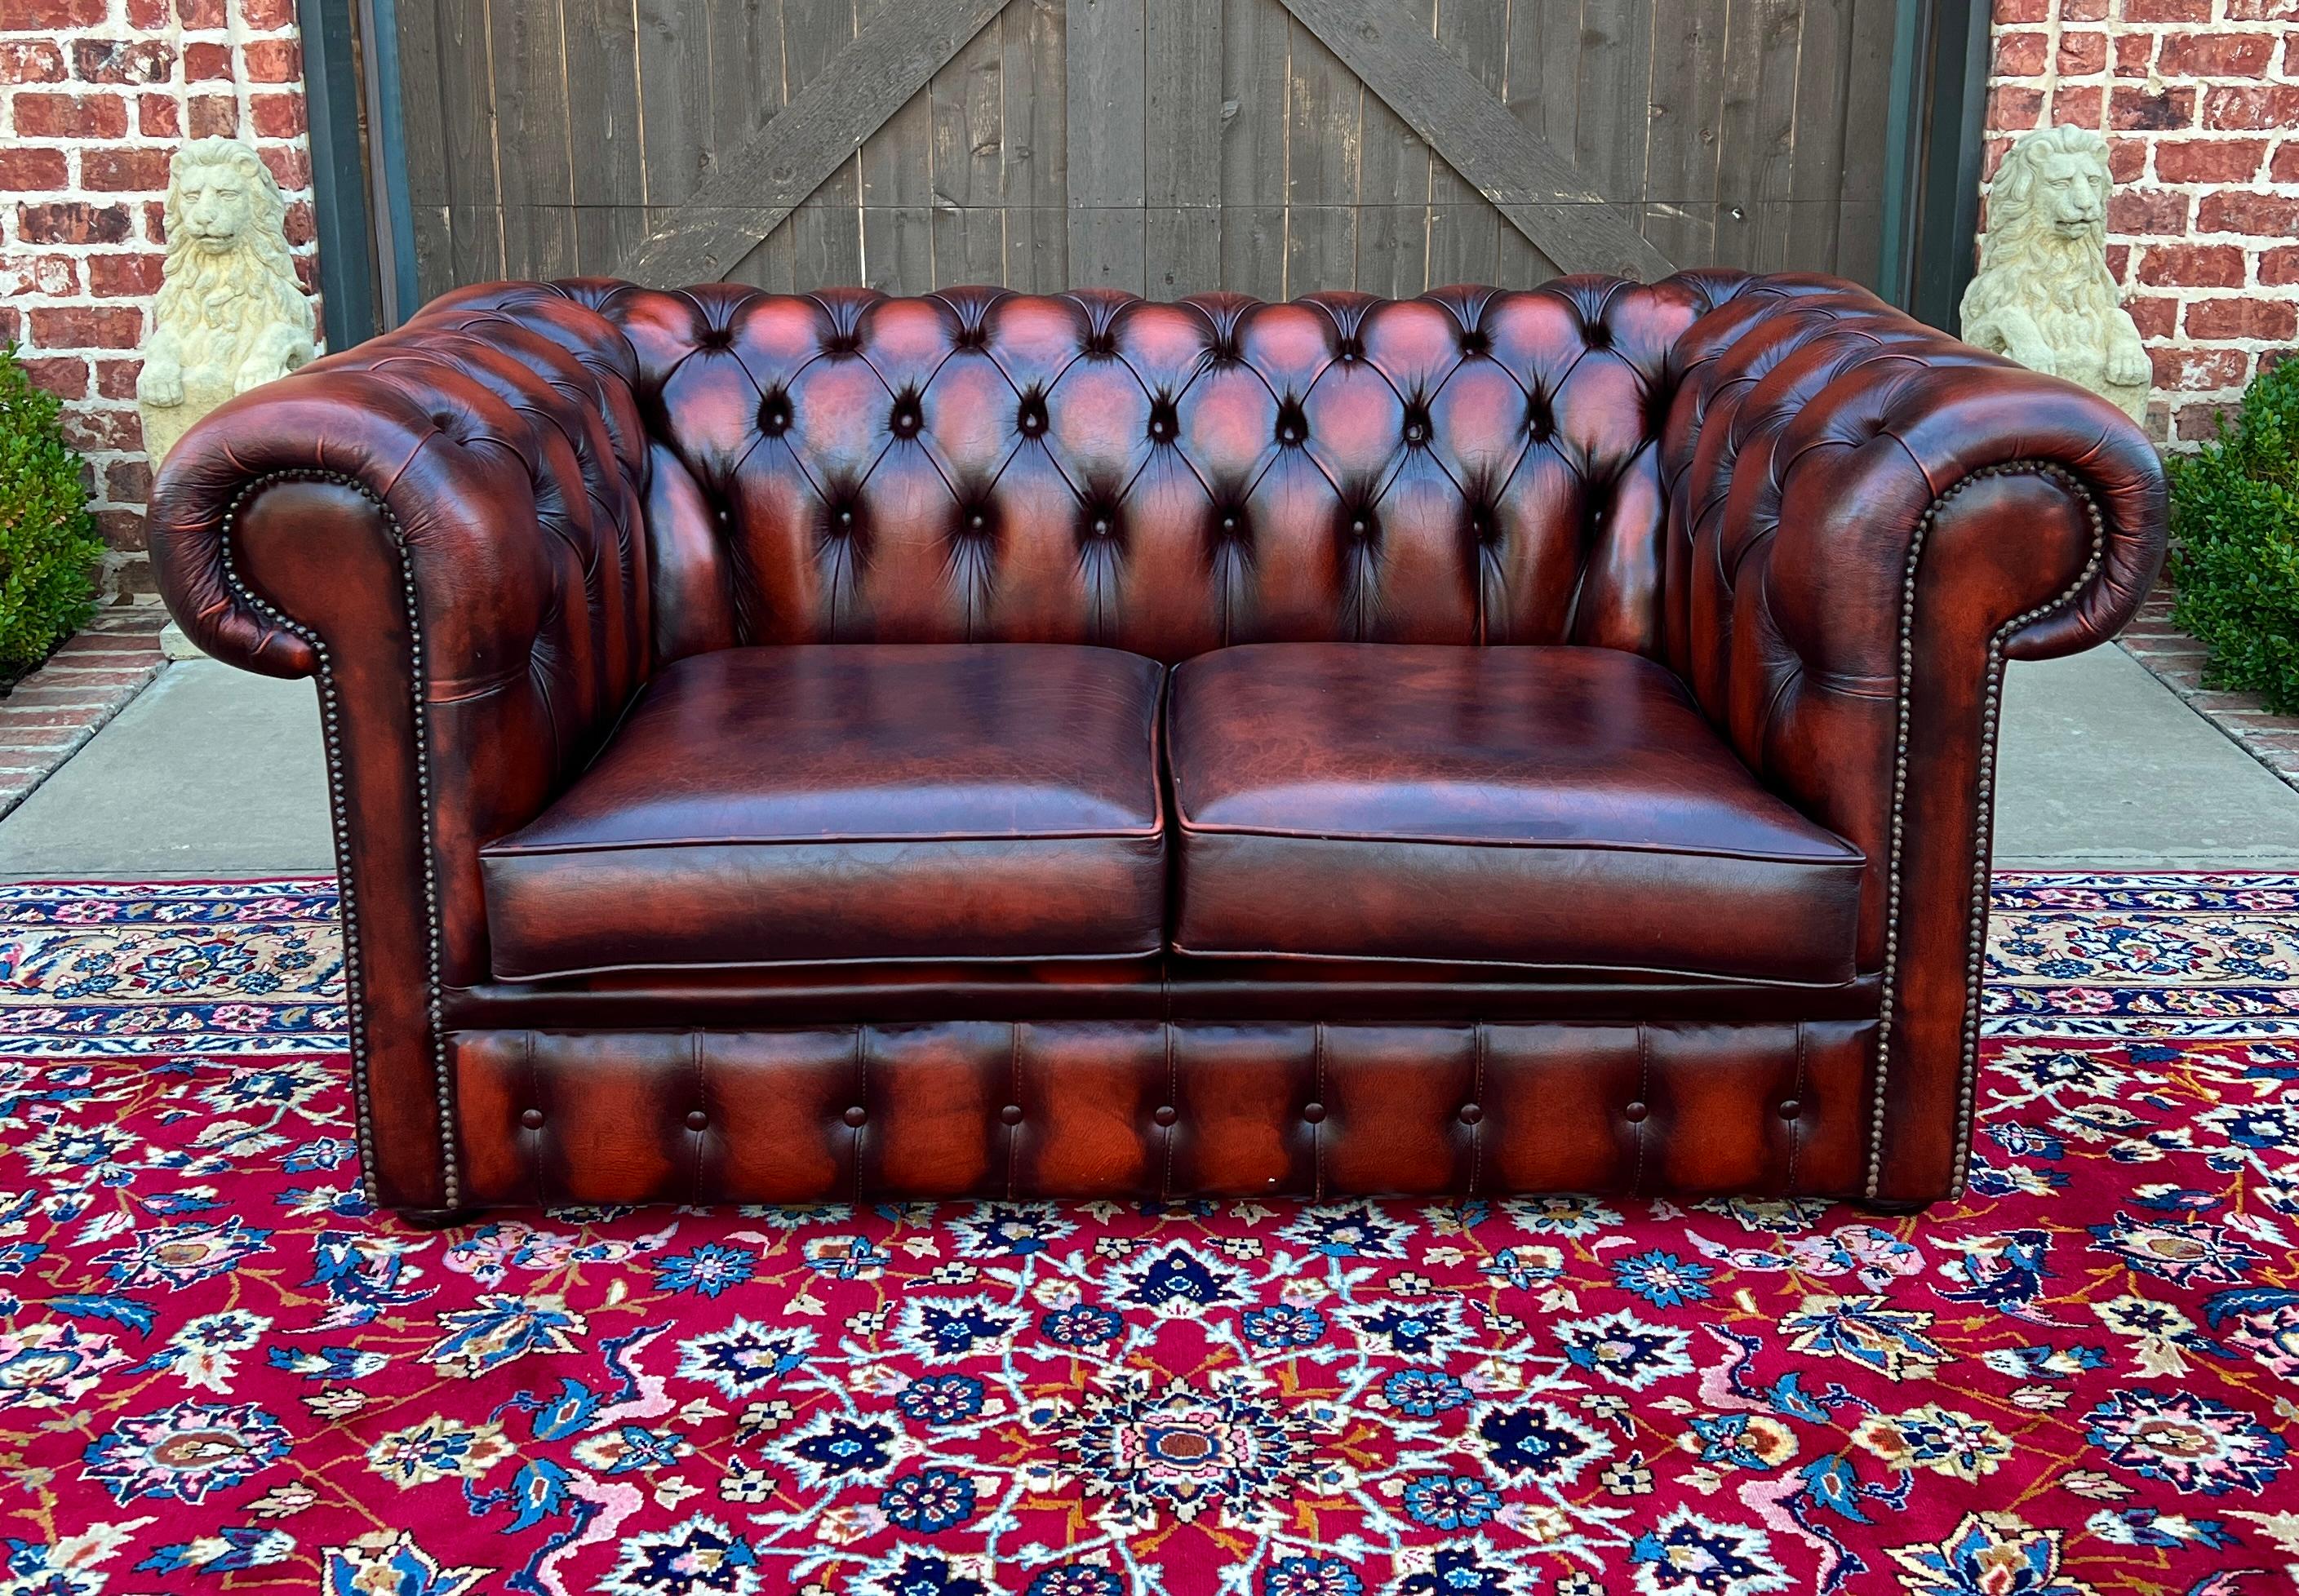 TIMELESS Vintage English Leather Tufted Seat CHESTERFIELD 2-Seat Sofa/Love Seat Oxblood Red

PERFECT ICONIC look for a gentleman's office, study, library, or cigar lounge~~fully button tufted upholstery is oxblood red in color~~timeless traditional